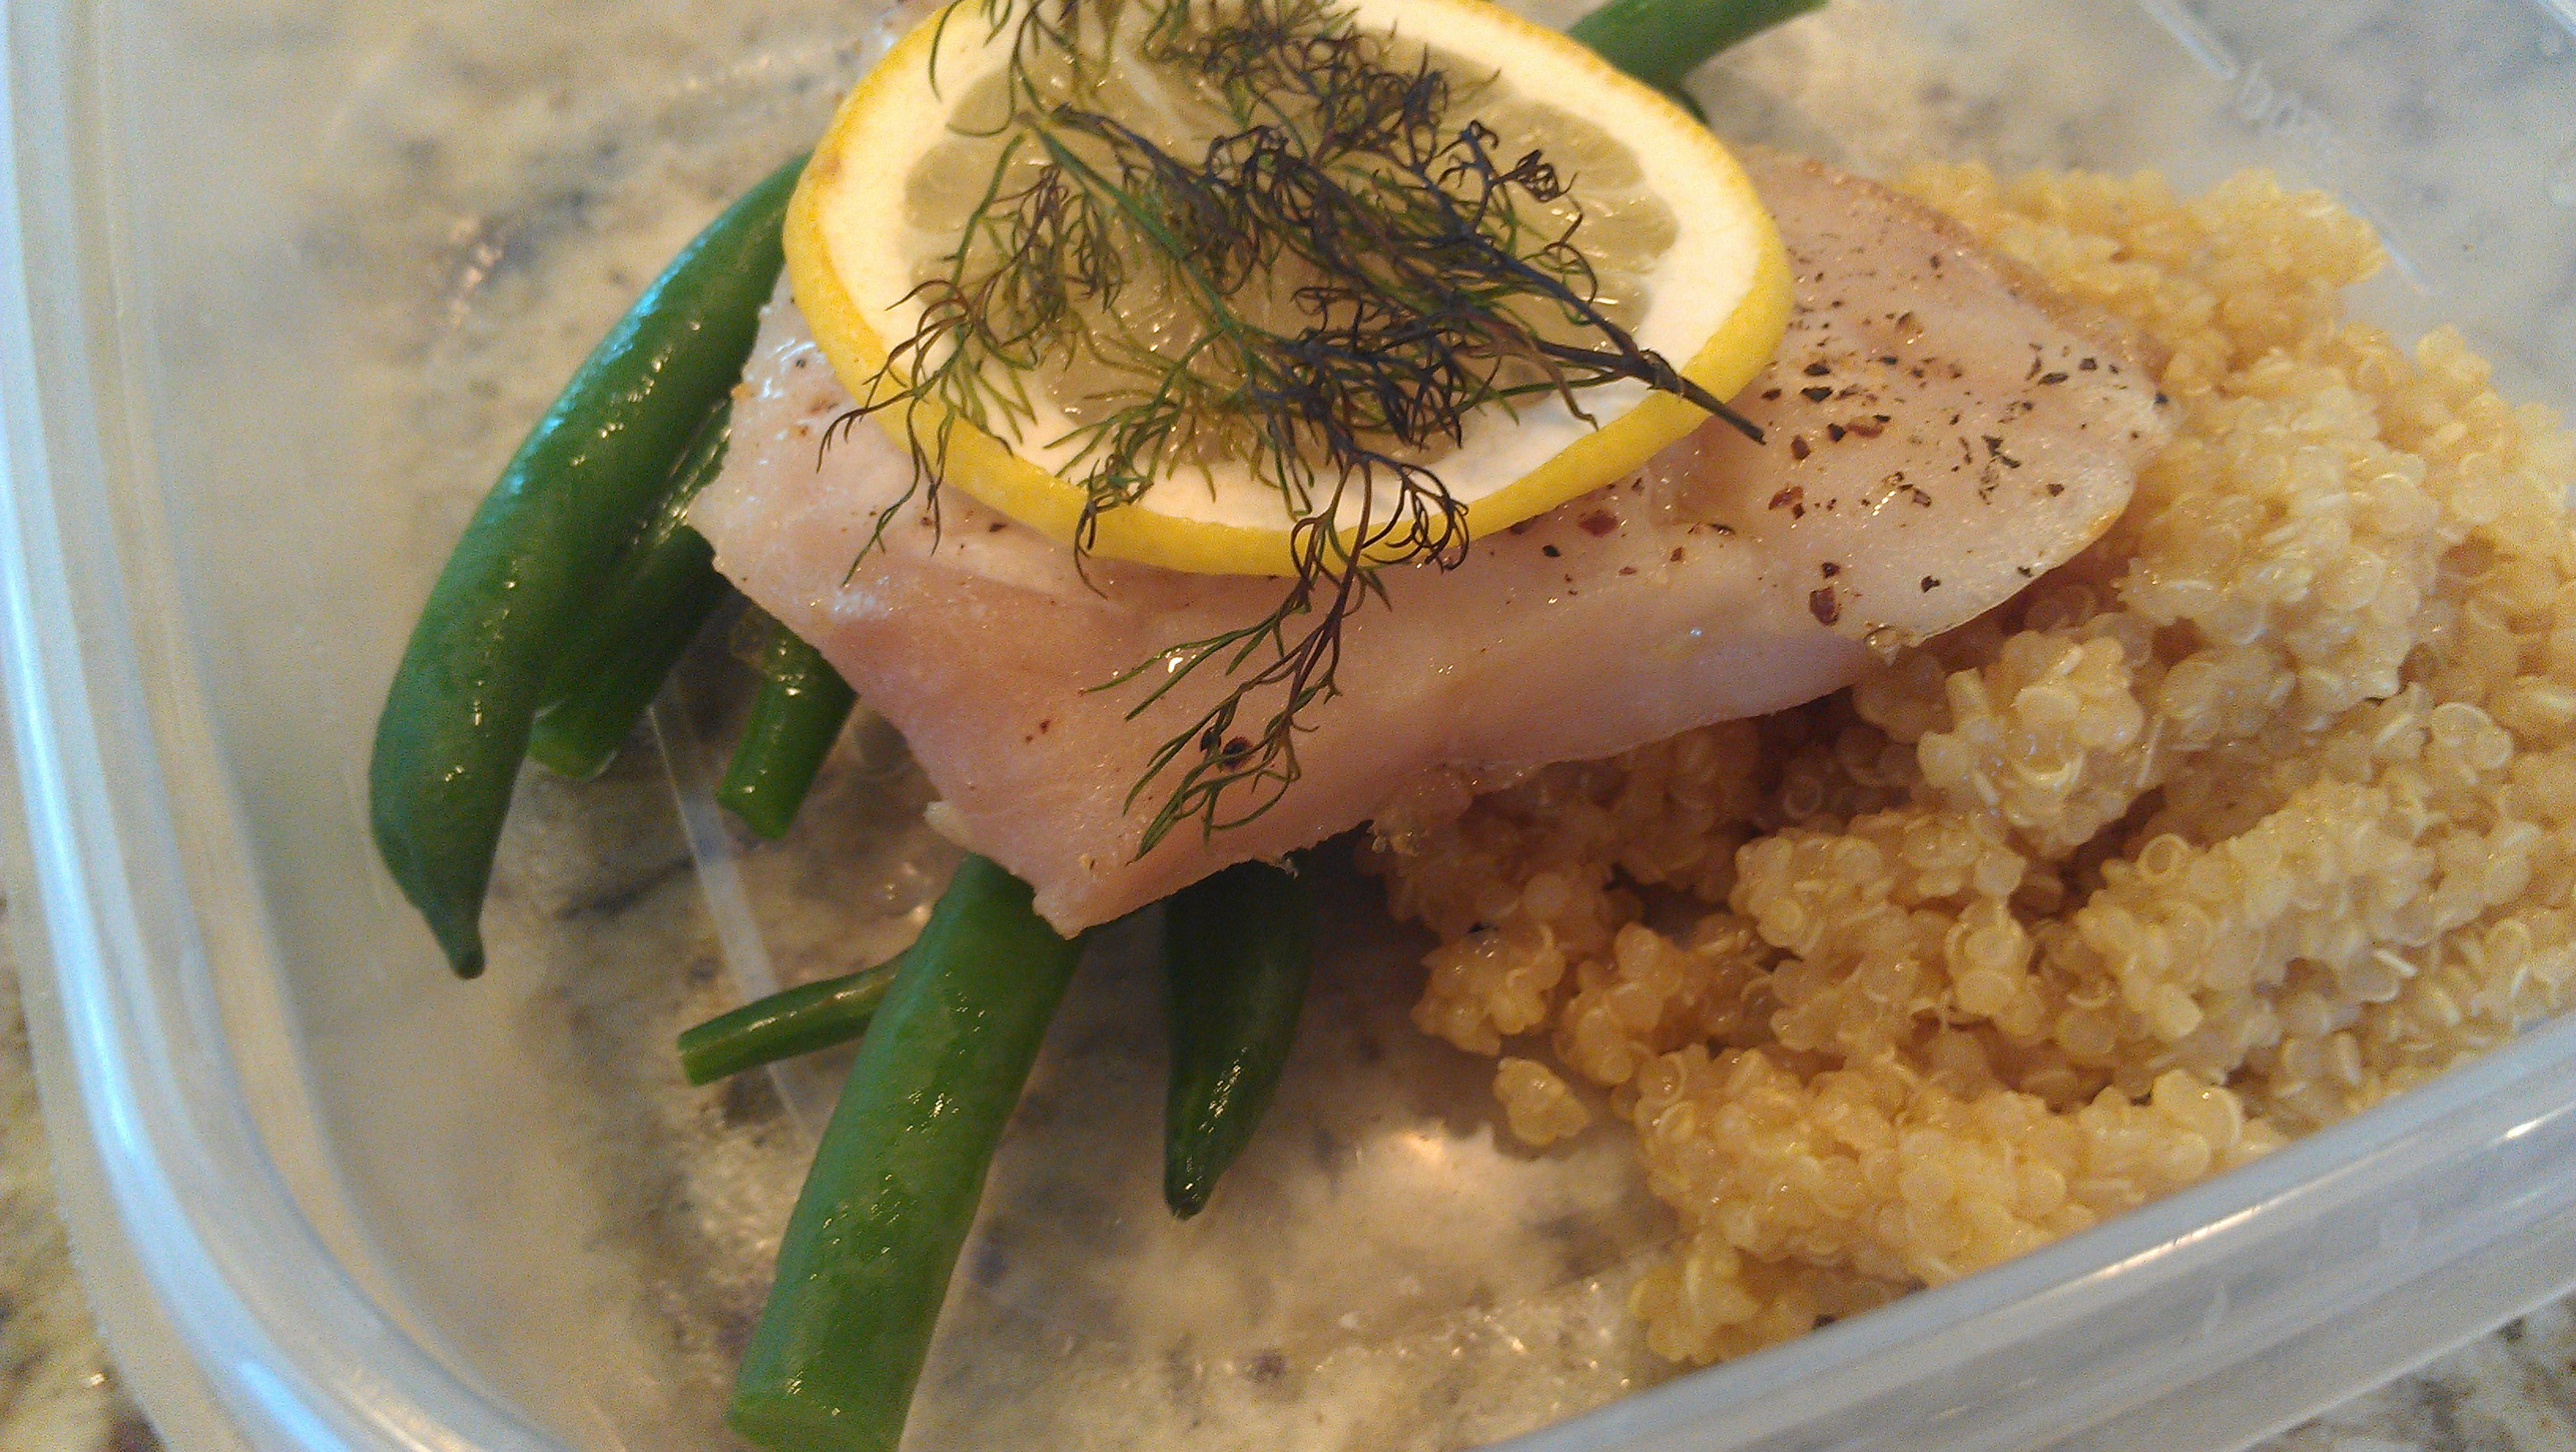 Broiled snapper and quinoa